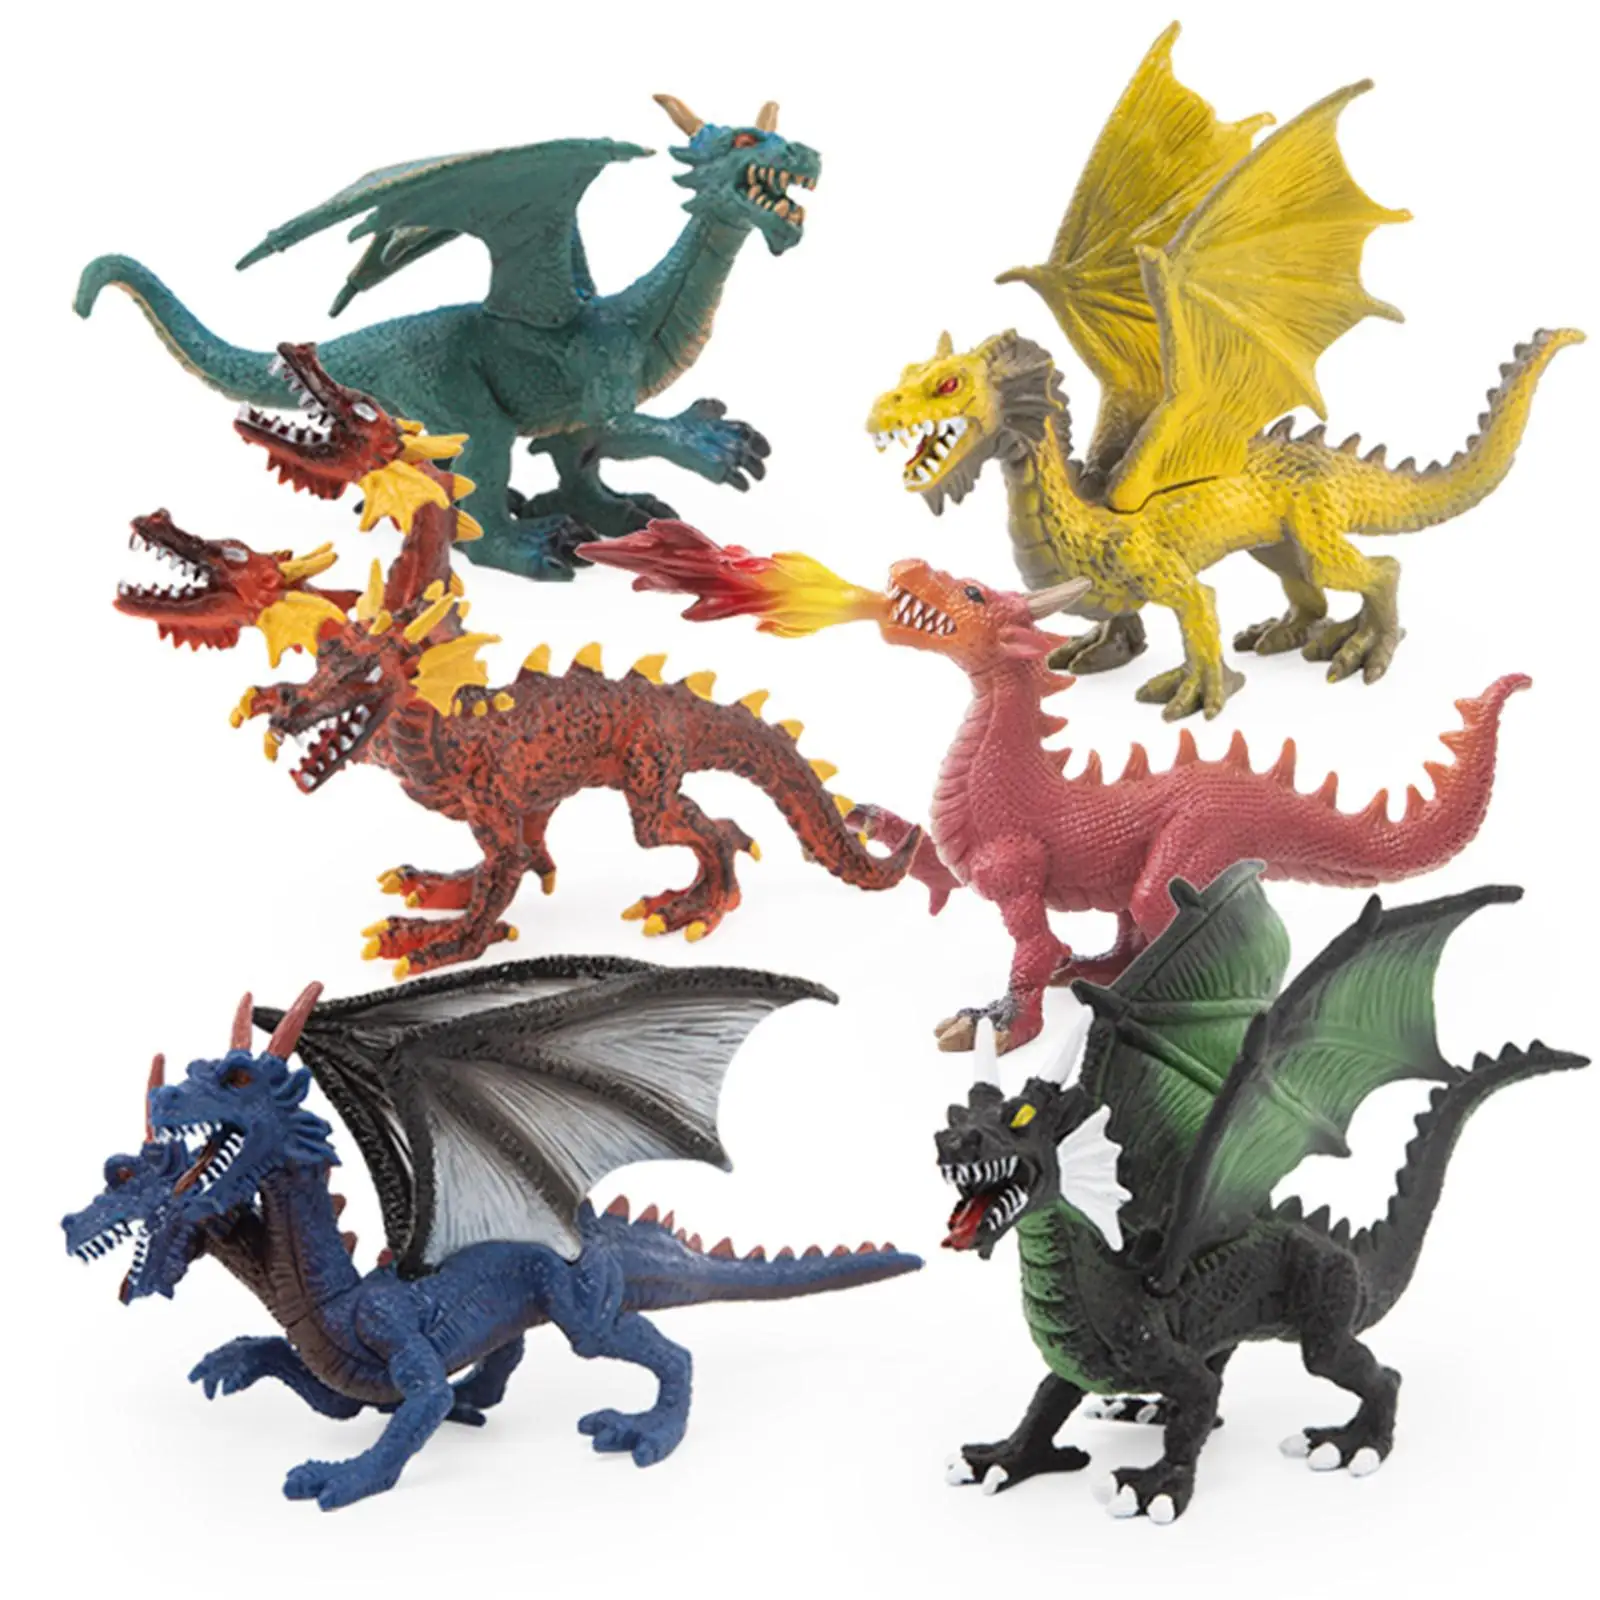 6x Dragon Figurines Doll Dragon Figures Realistic Action Figurine for Party Favor Birthday Collection Rewards Teaching Props